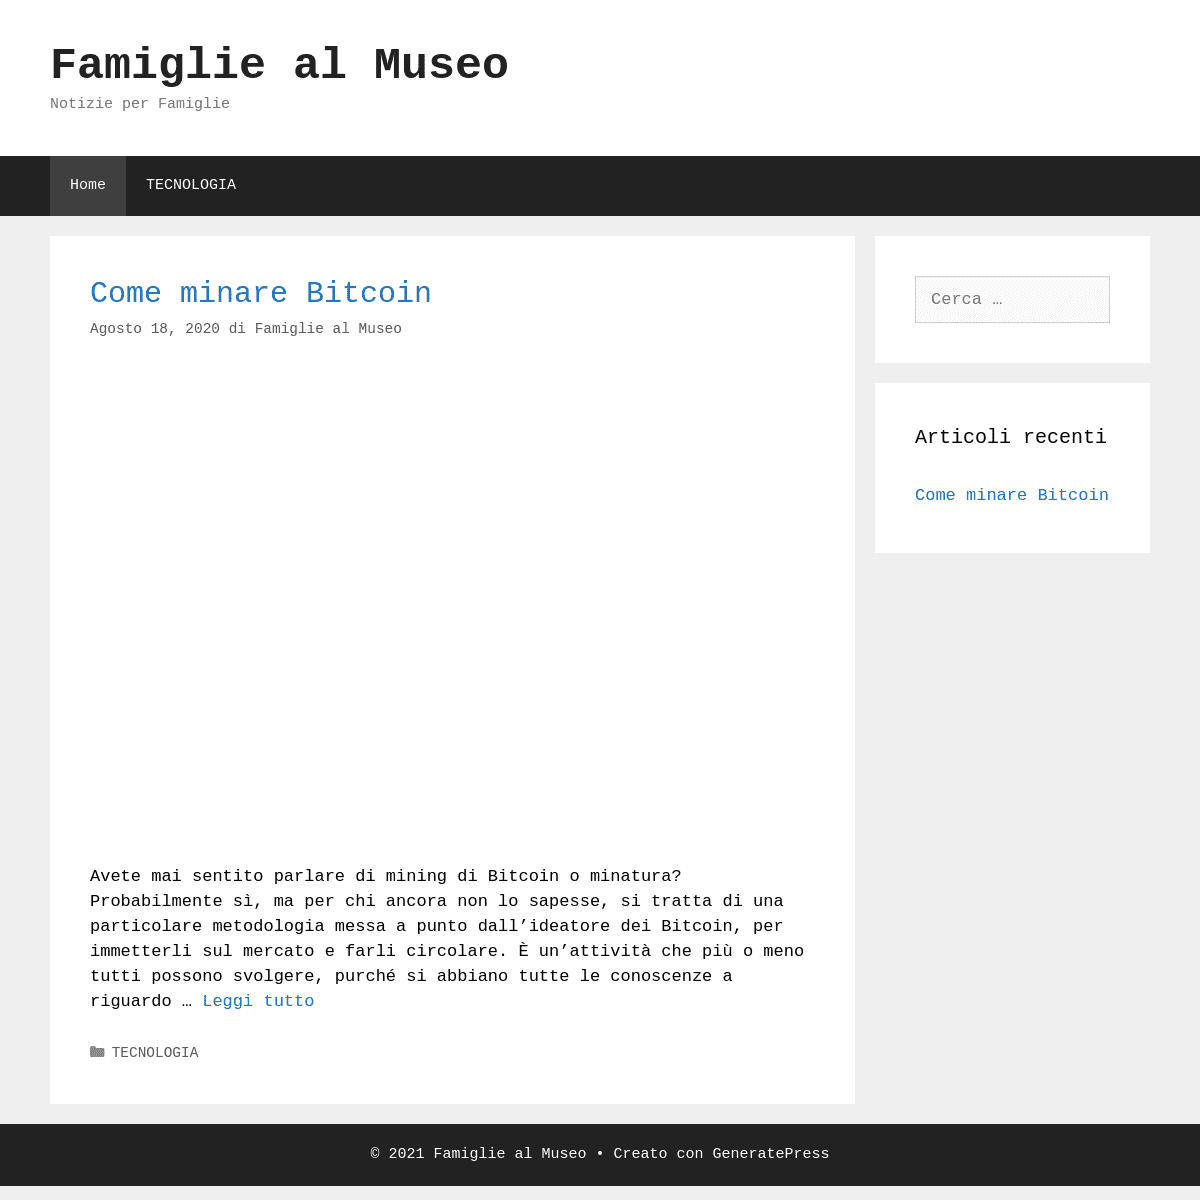 A complete backup of https://famigliealmuseo.it